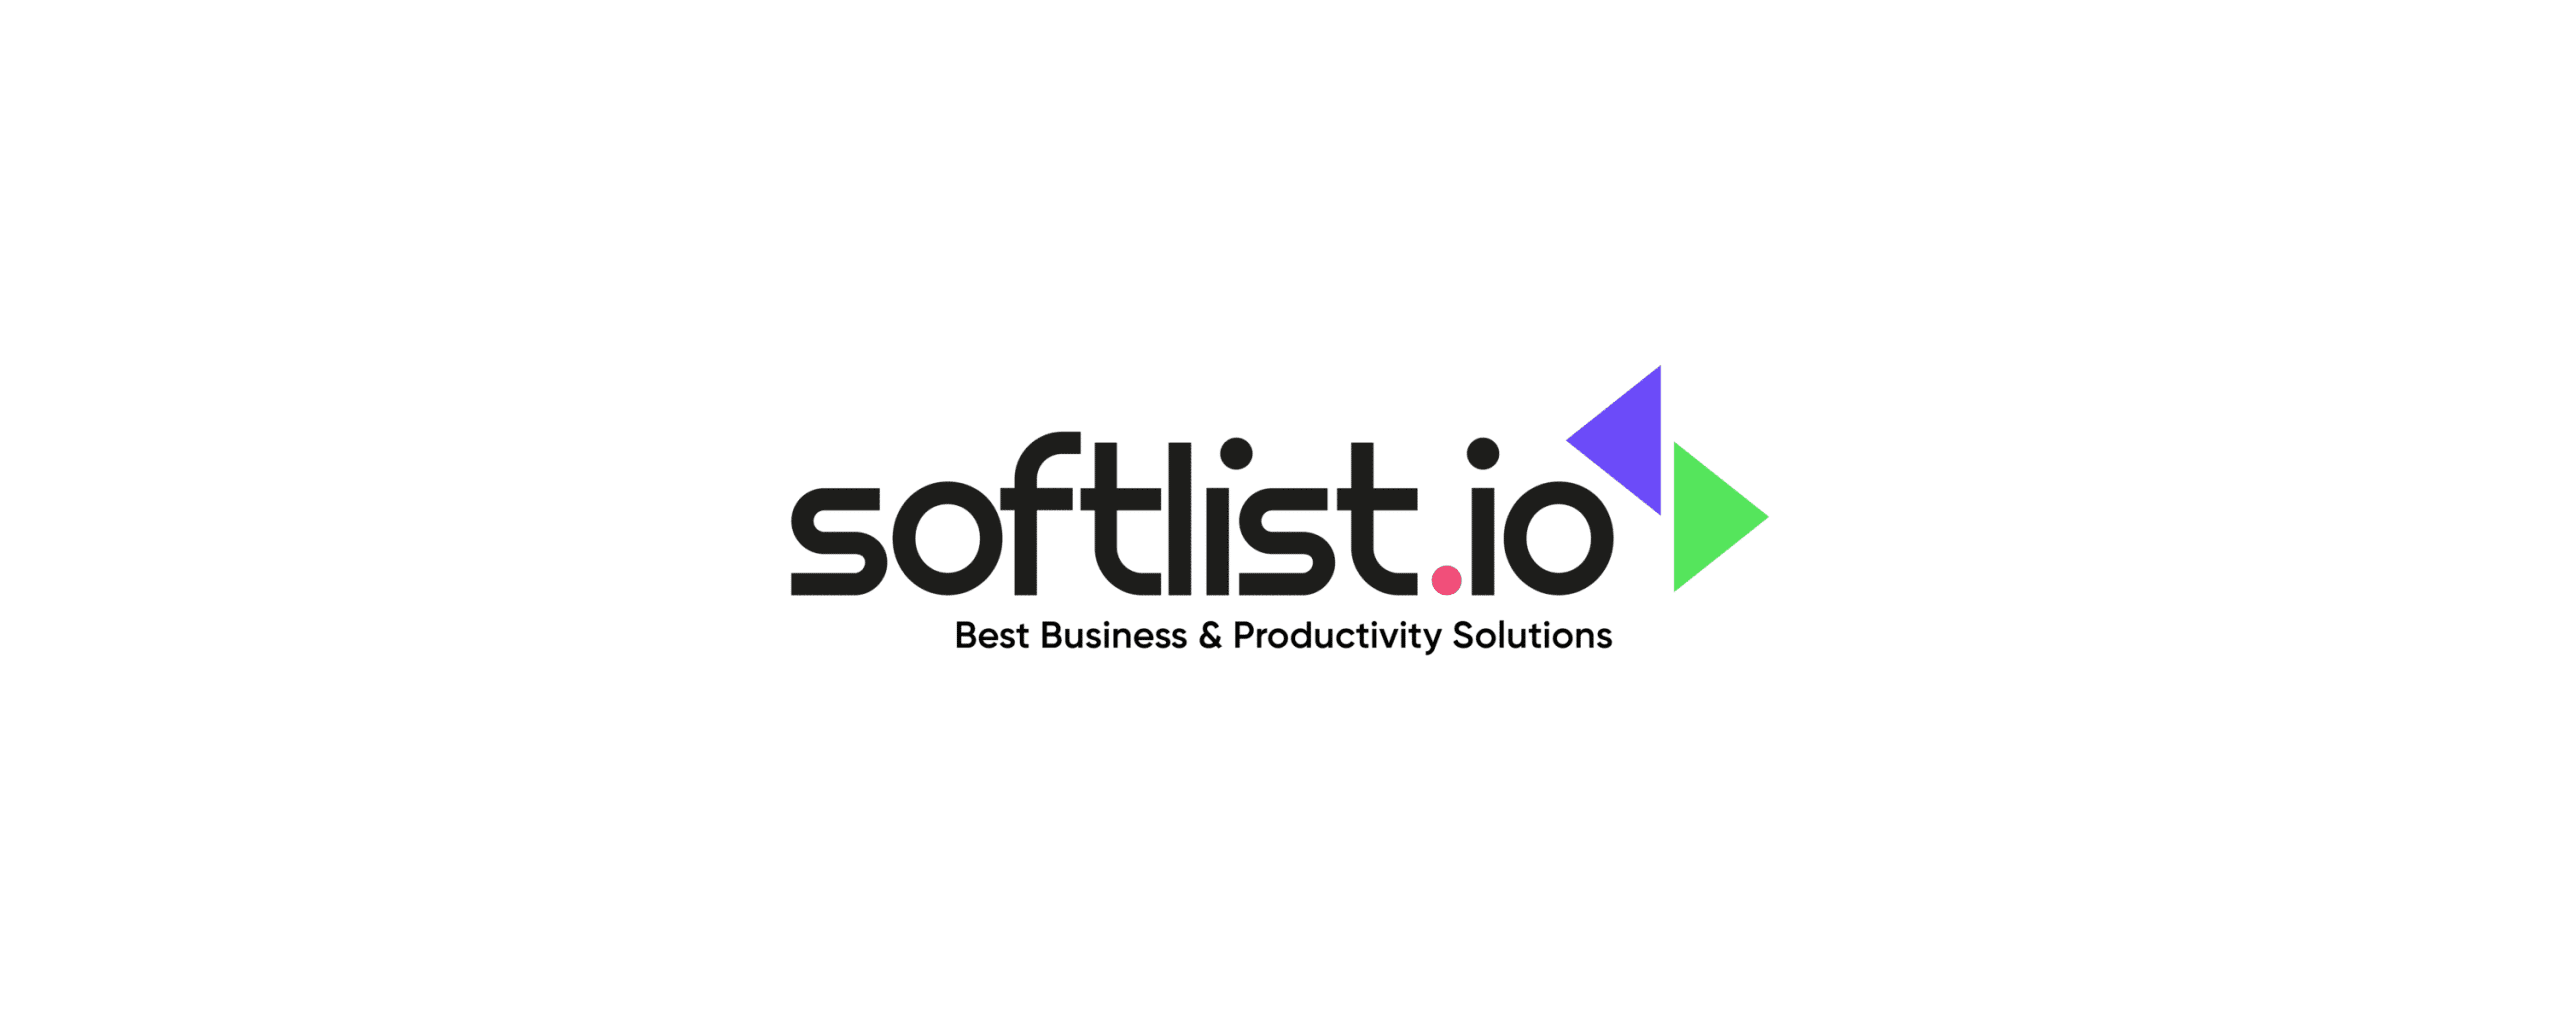 softlist.io new logo - blog, terms and privacy policy